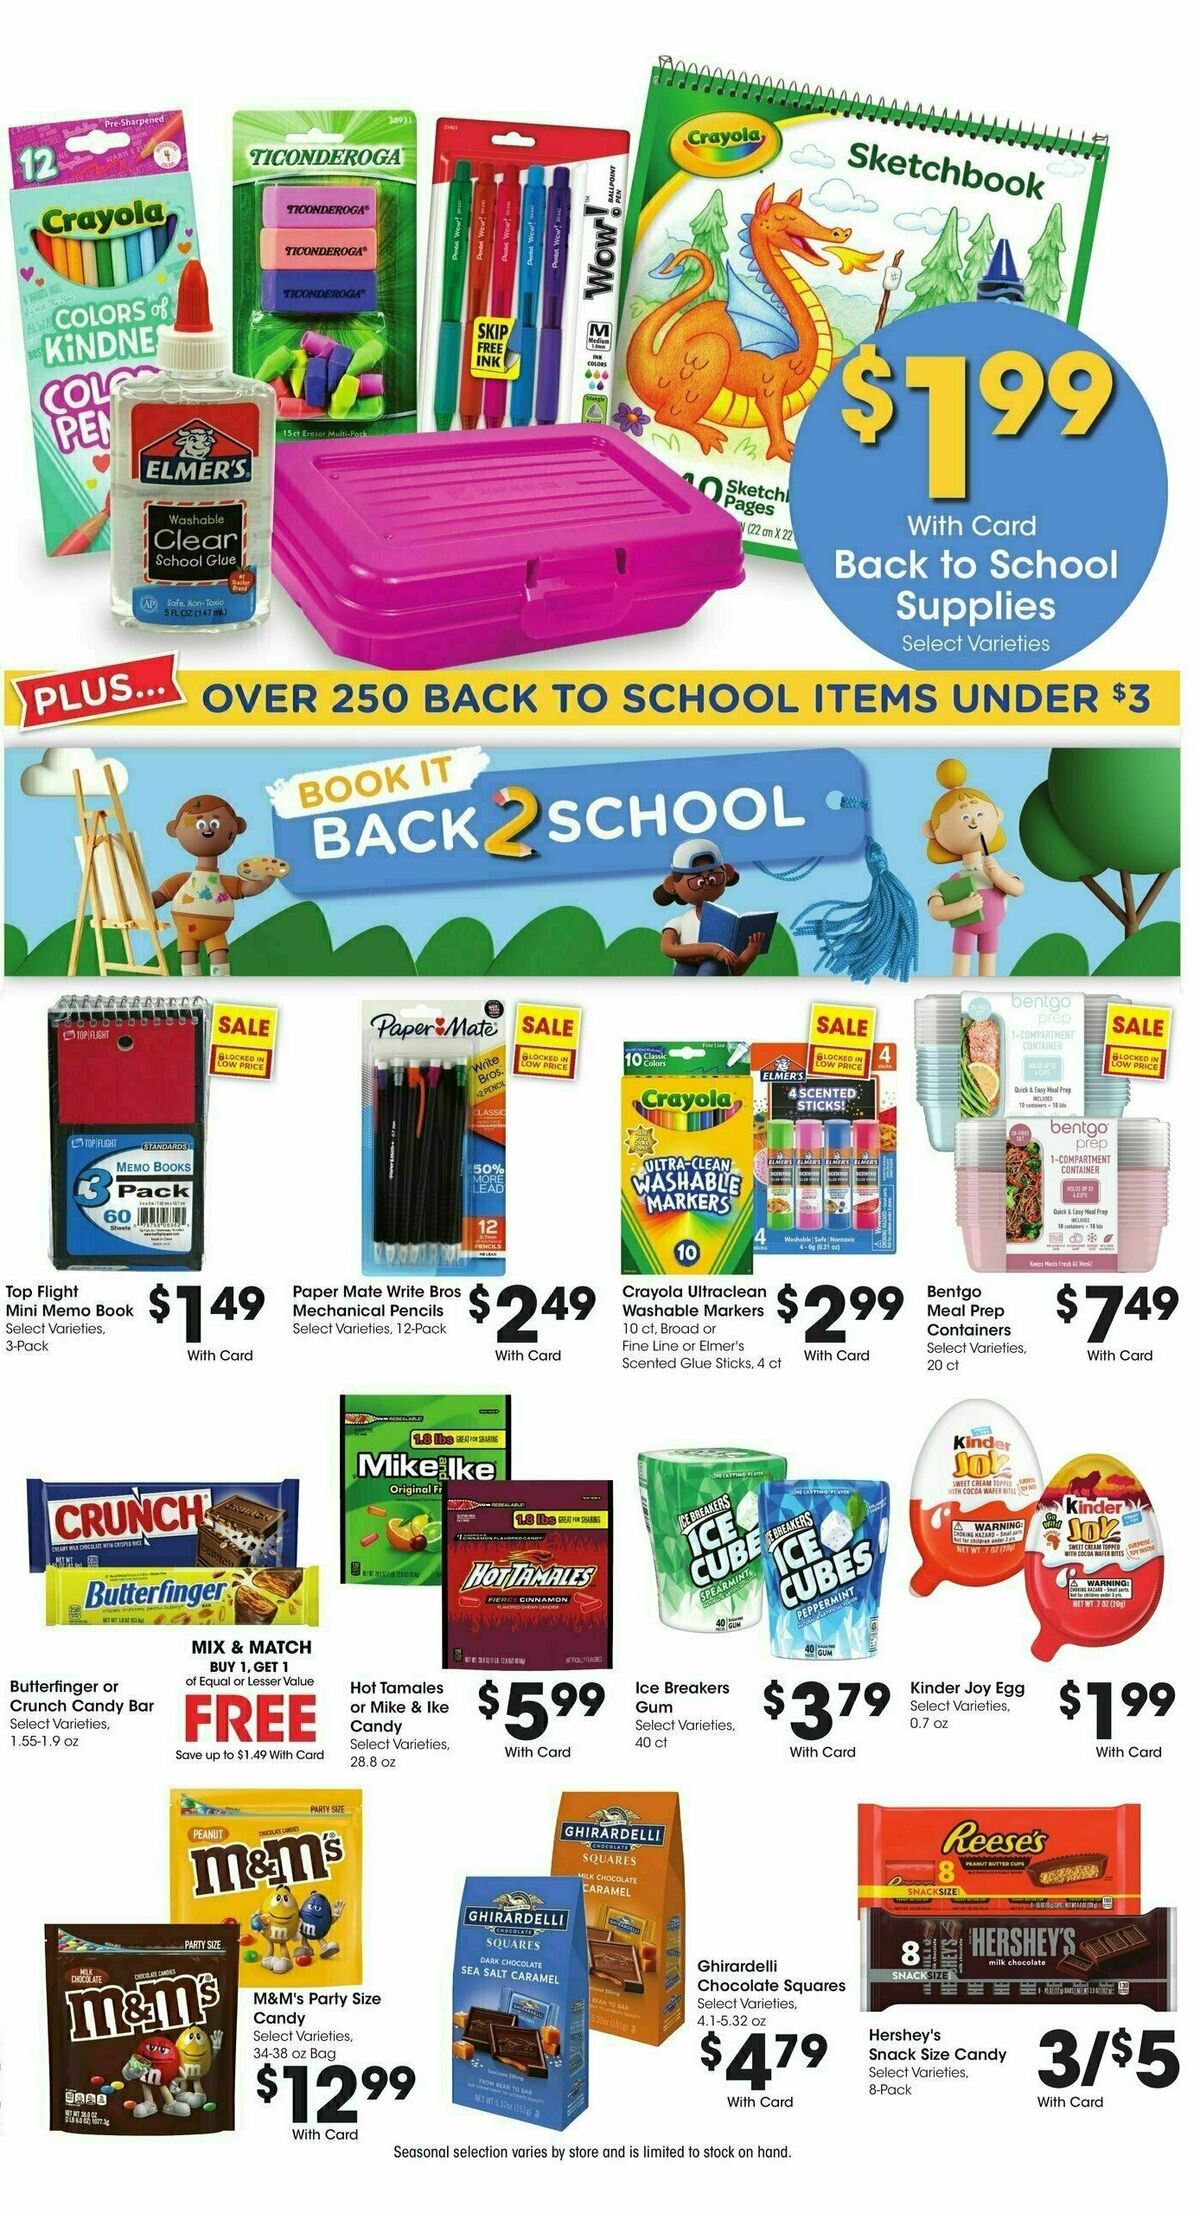 Baker's Weekly Ad from August 23